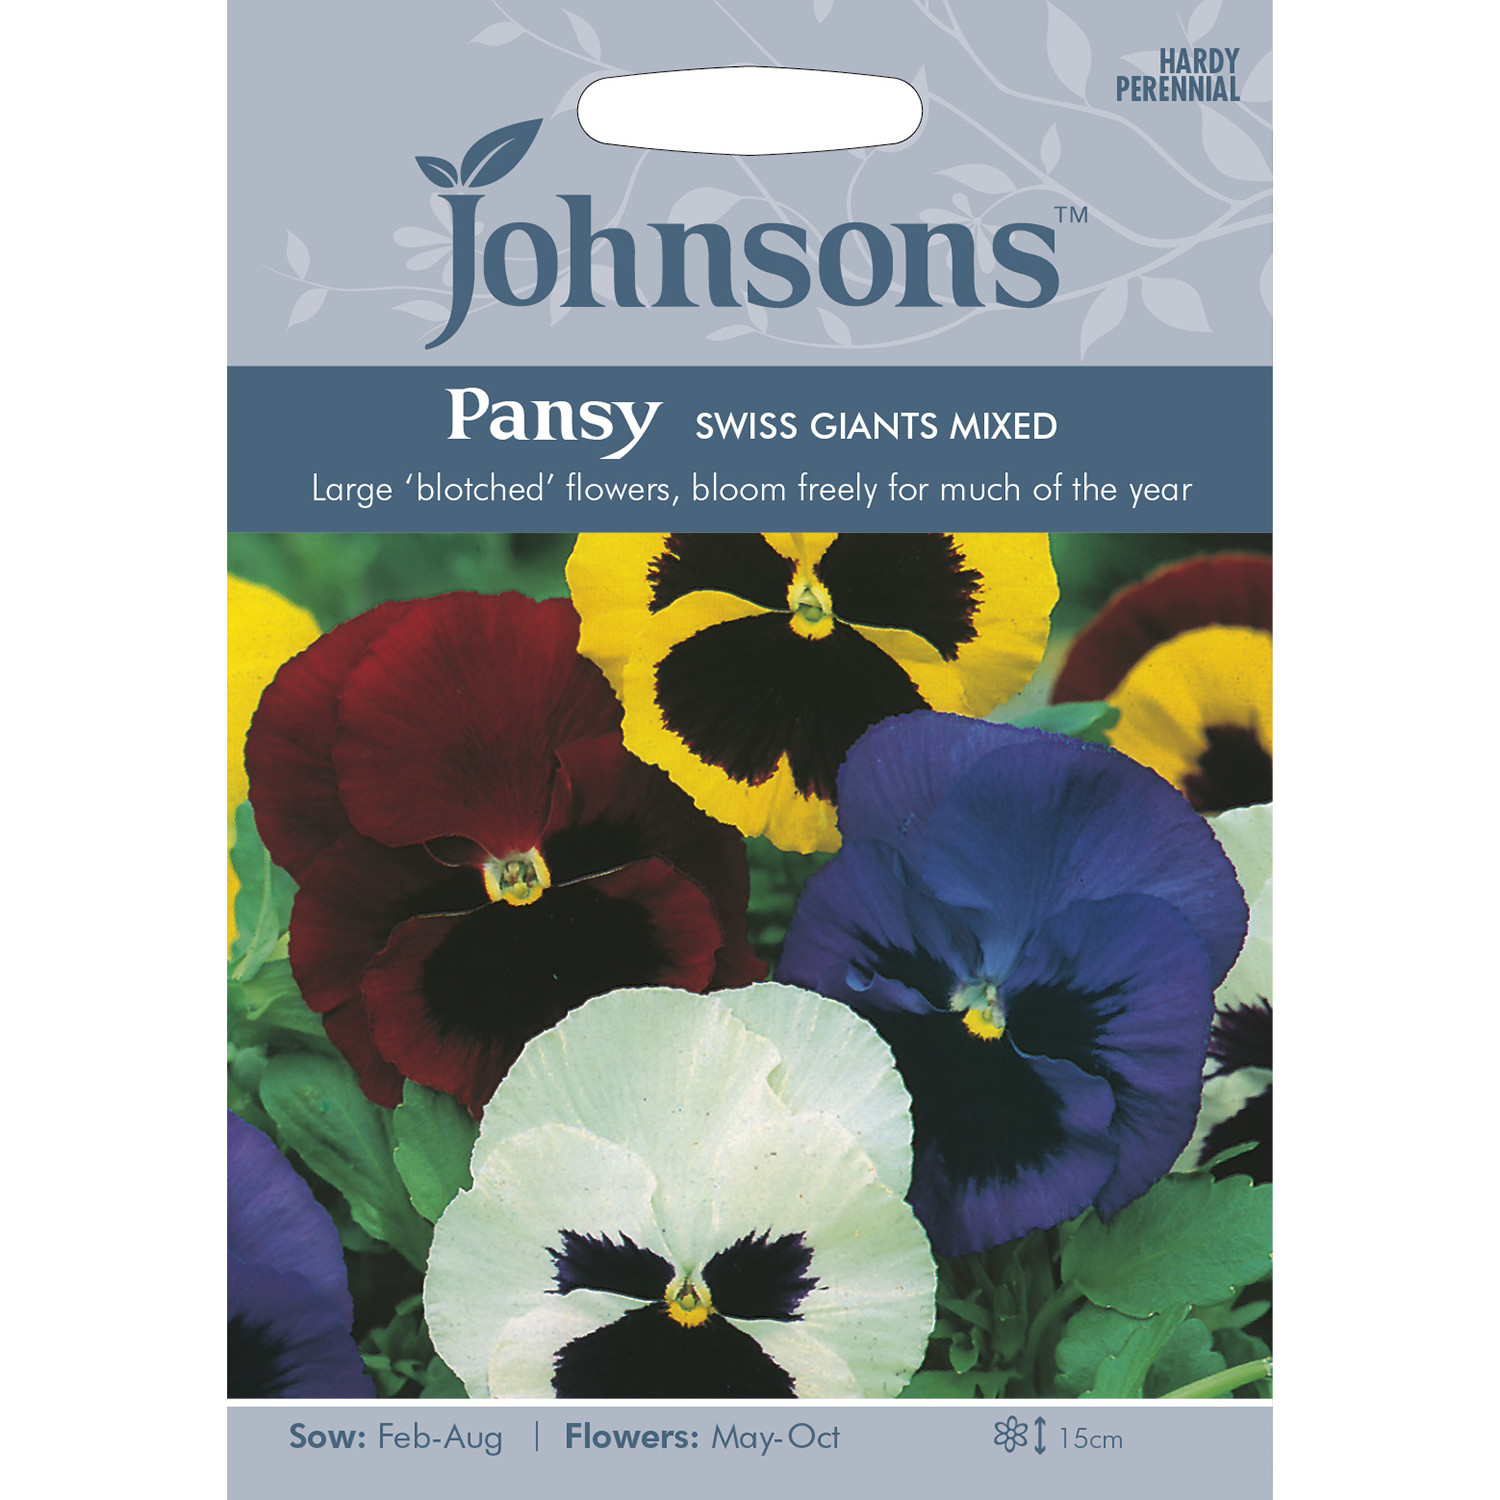 Johnsons Pansy Swiss Giant Mixed Flower Seeds Image 2